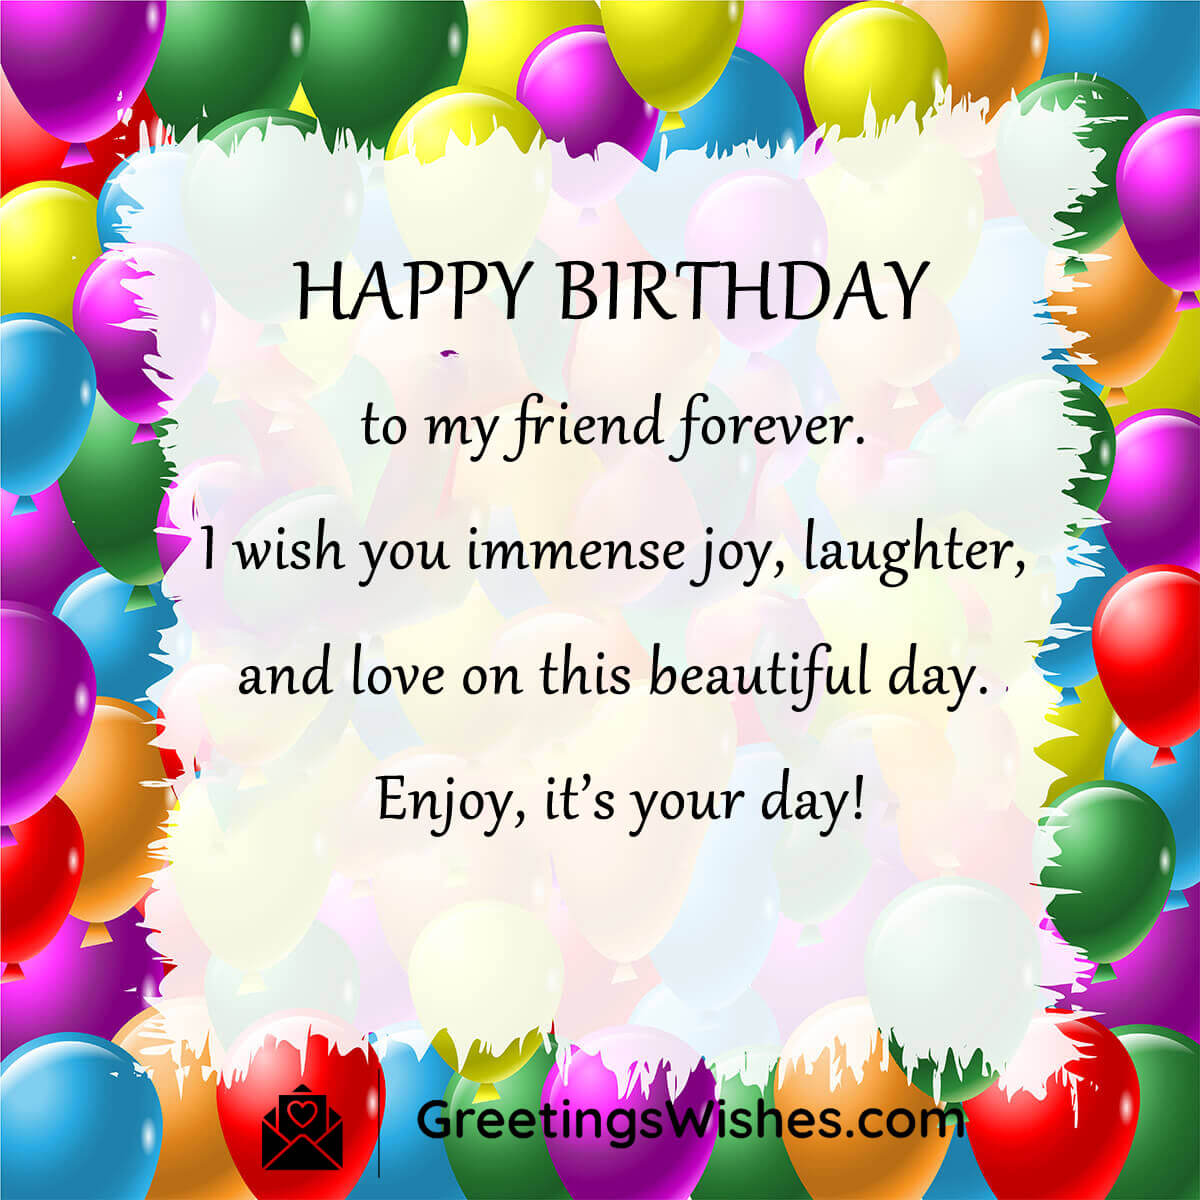 Best Friend Birthday Wishes - Greetings Wishes